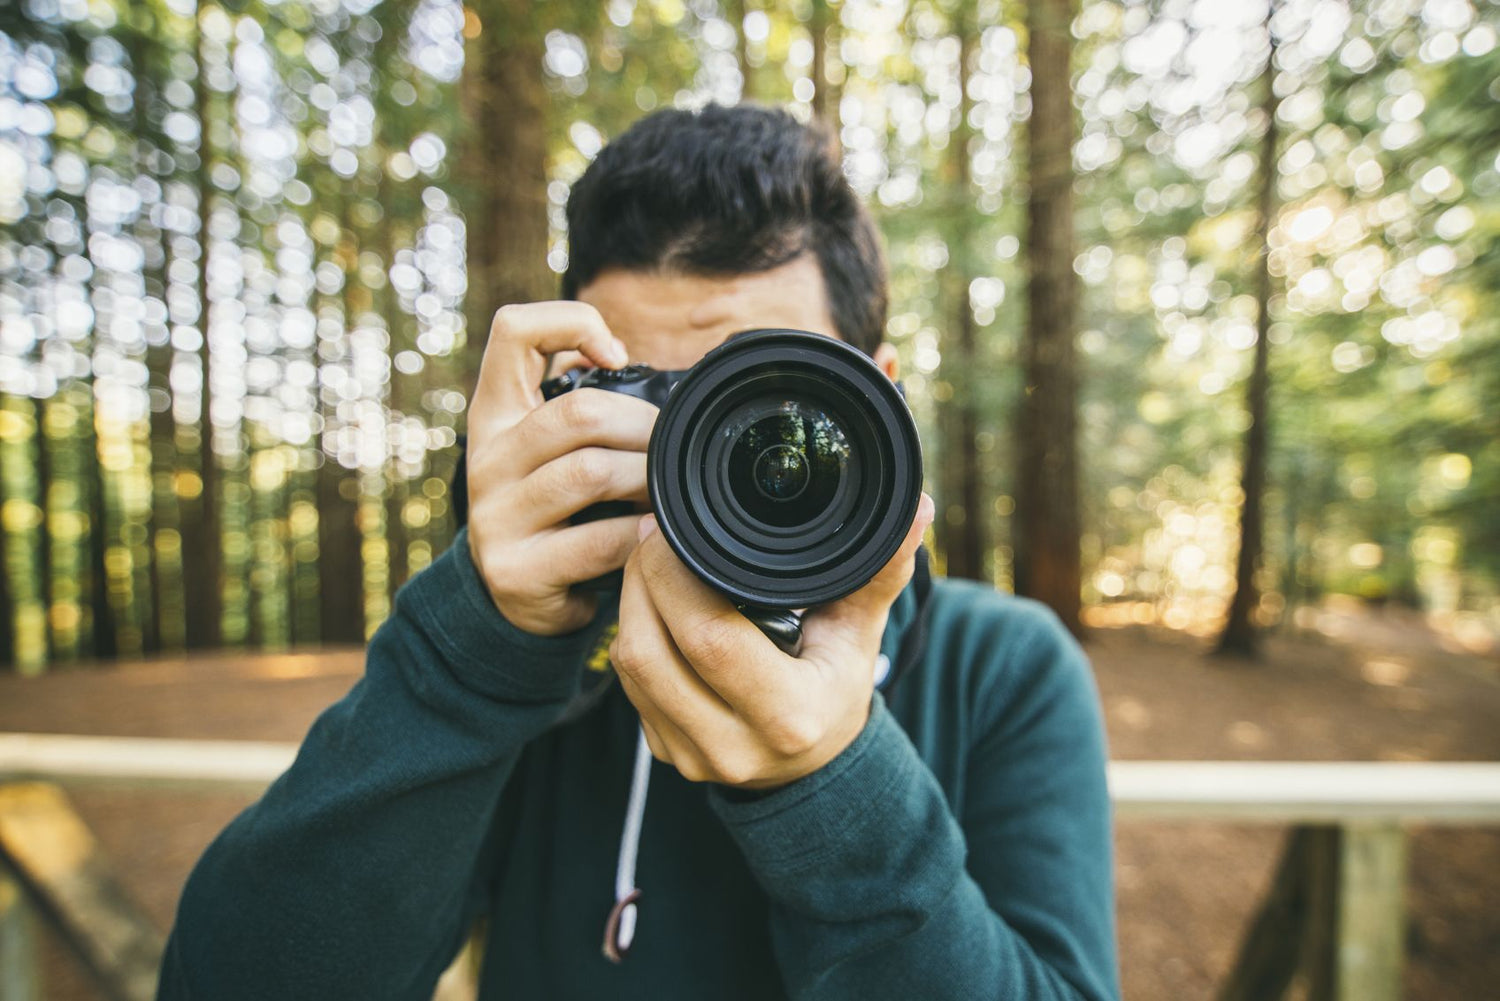 How to develop an exciting career in Photography